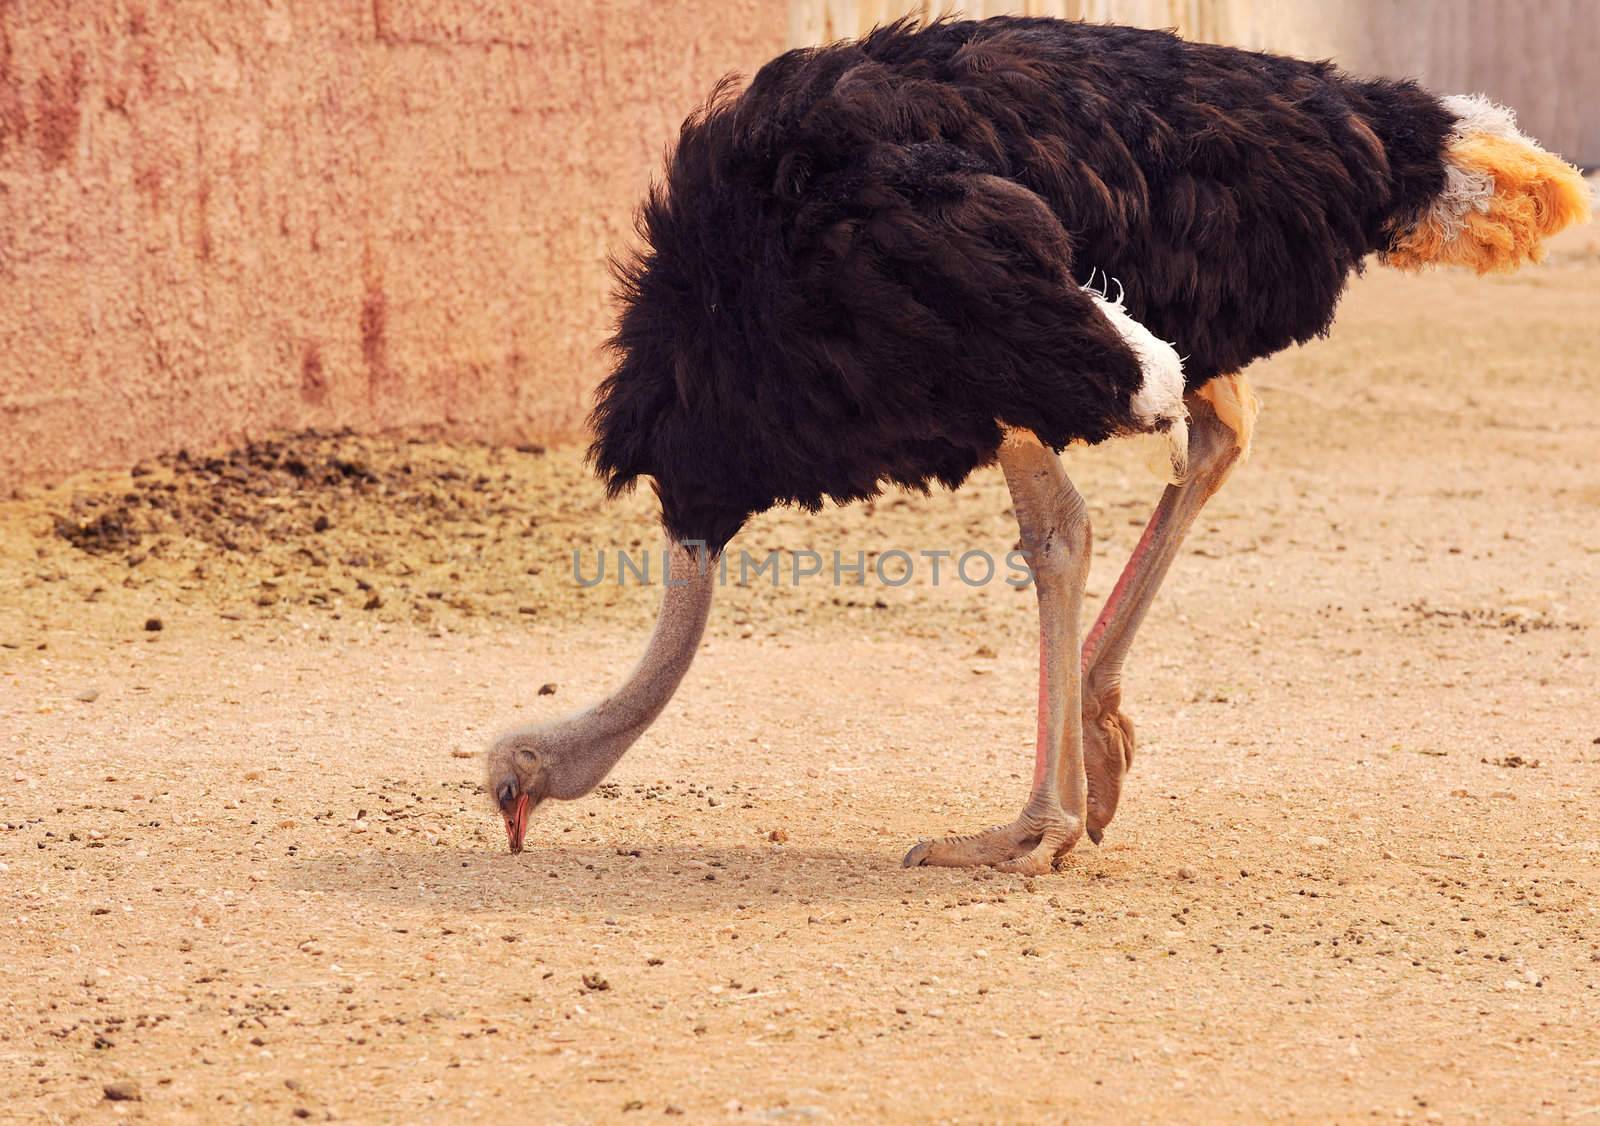 An ostrich in a zoo environment pecking with its beak